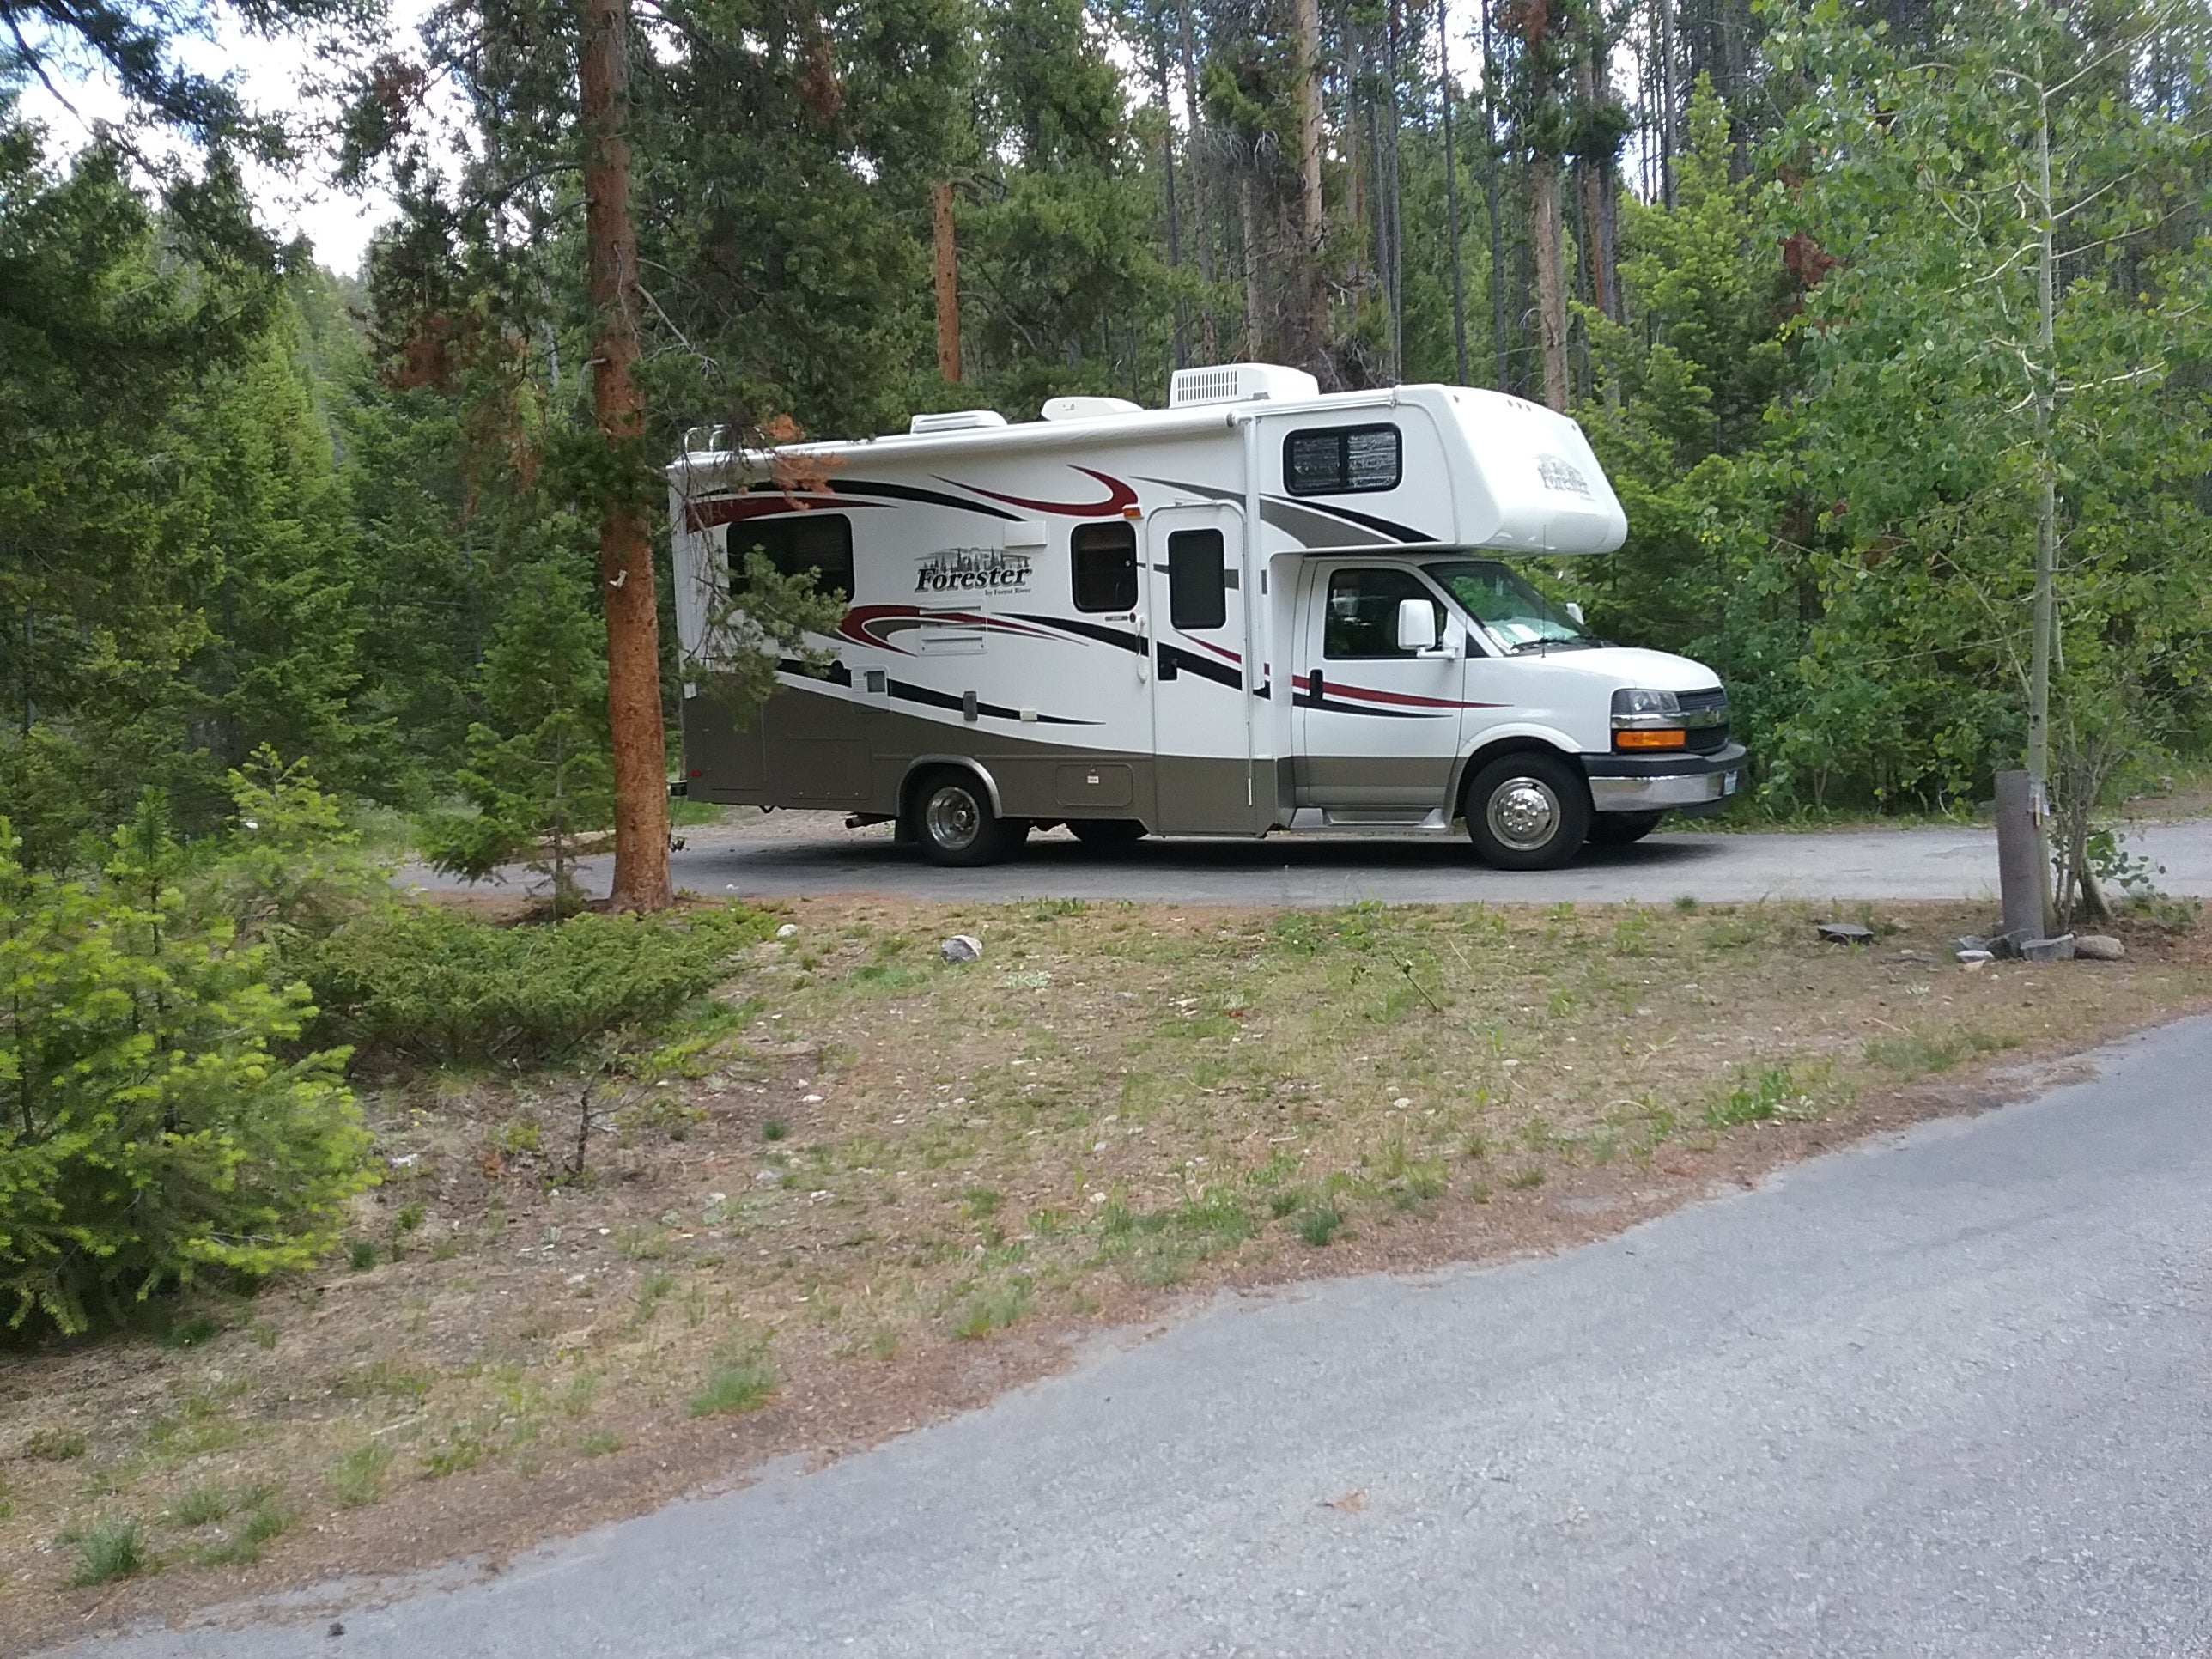 Camper submitted image from Beaverhead National Forest Pettengill Campground - 4